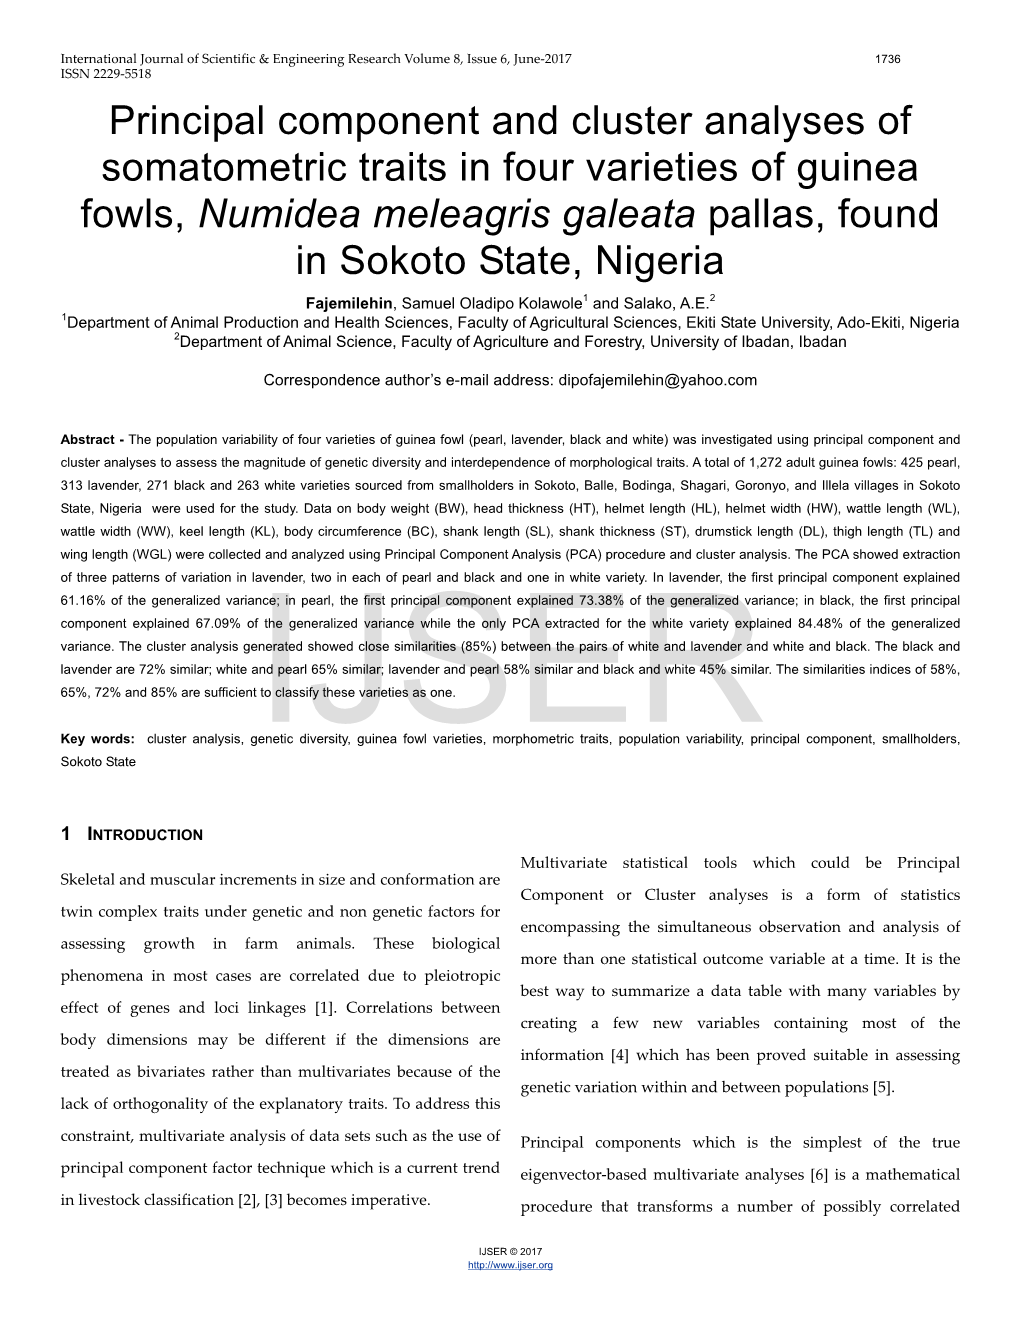 Component and Cluster Analyses of Somatometric Traits in Four Varieties